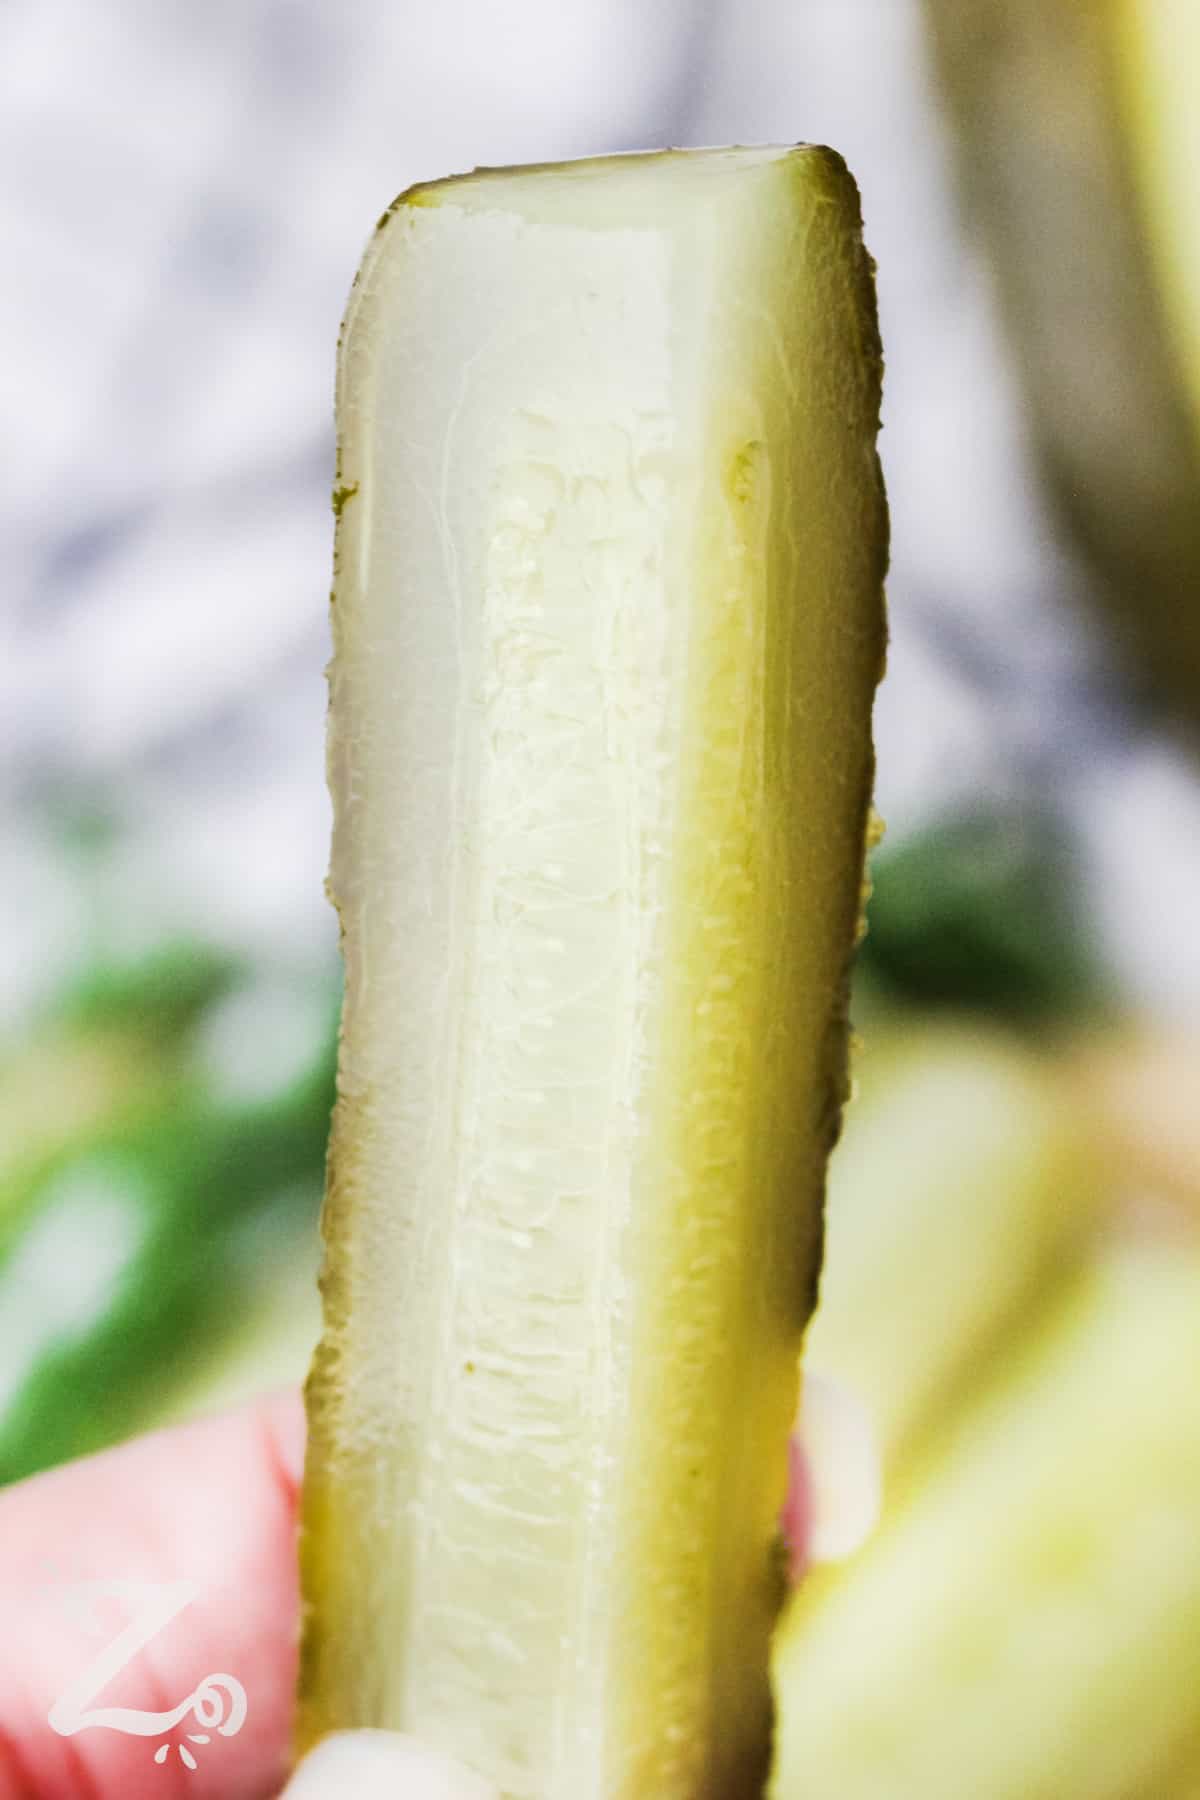 A slice of a dill pickle